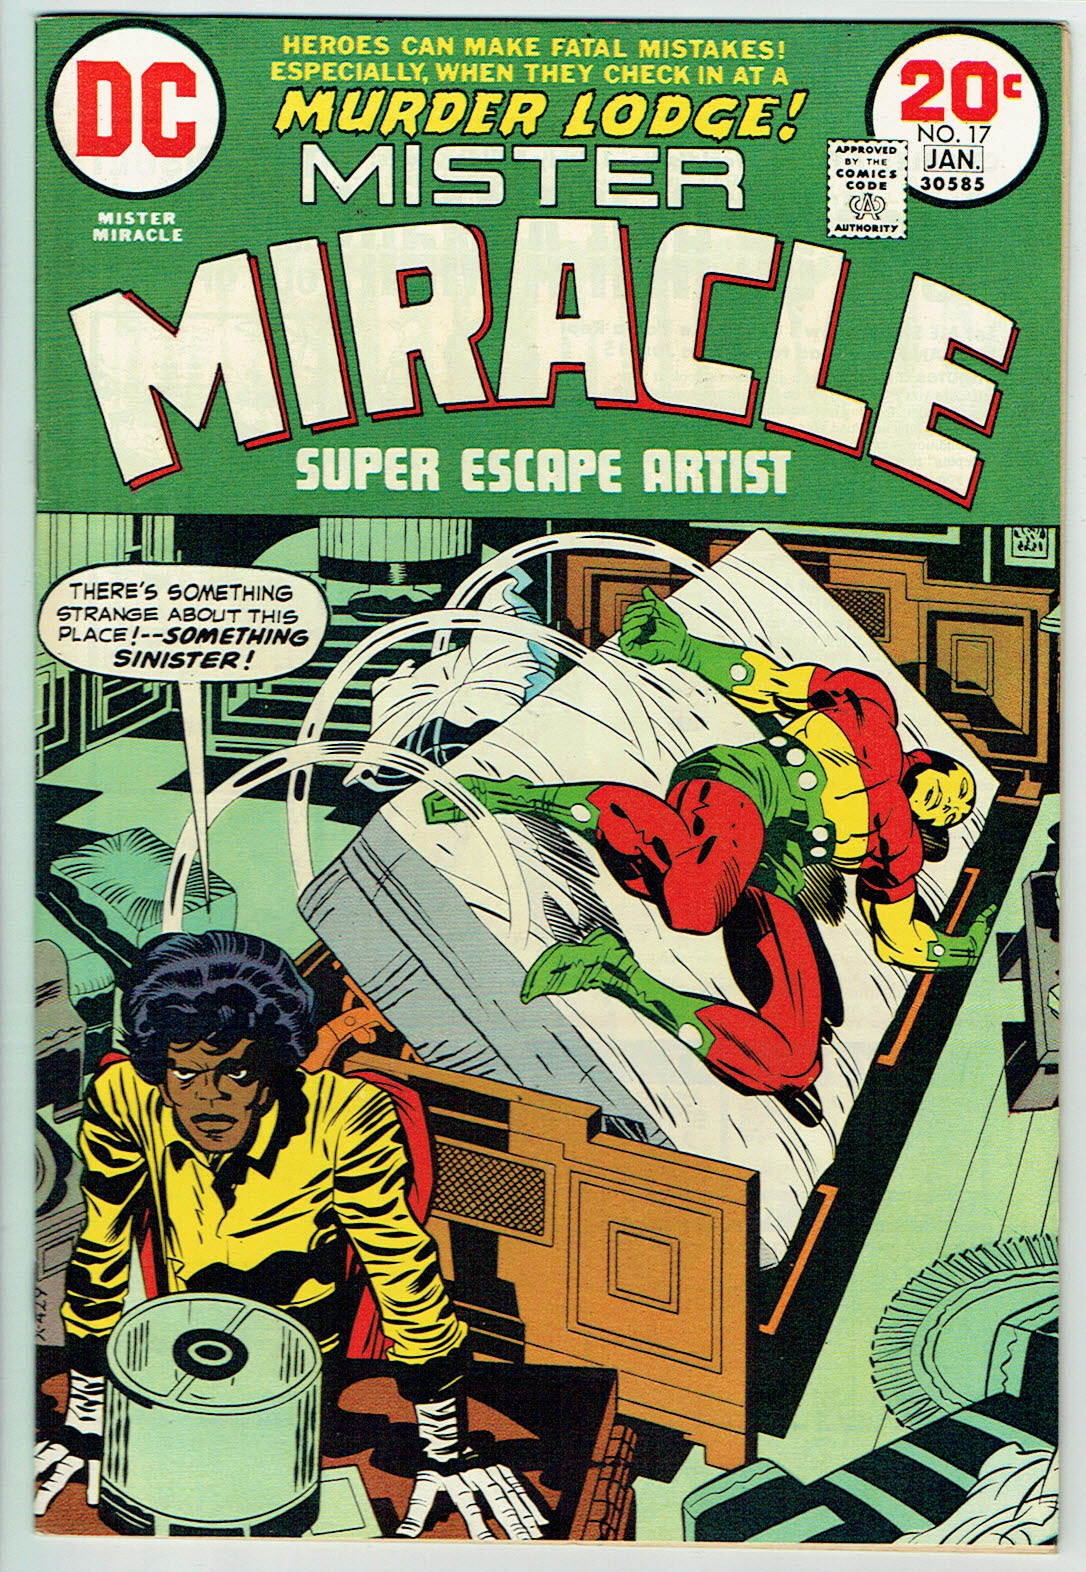 Mister Miracle  #17